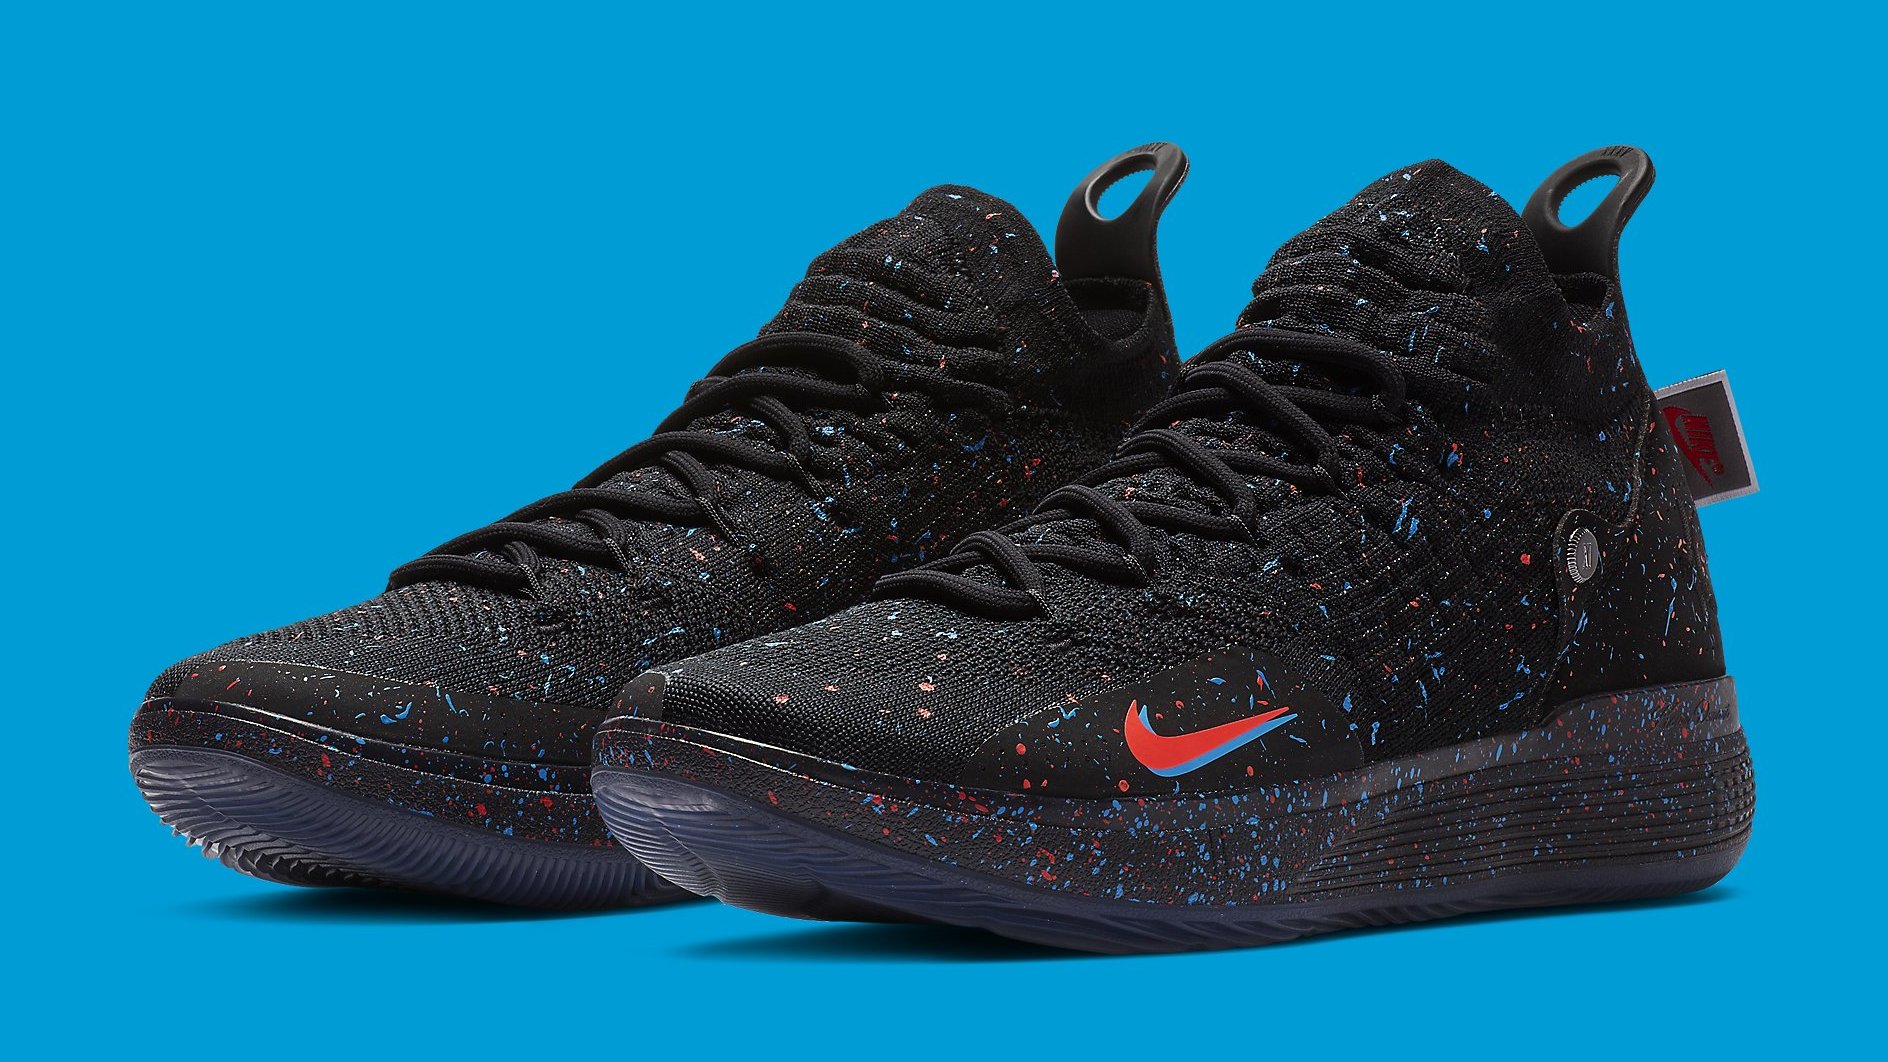 Buy Kd 11 Shoes: New Releases & Iconic Styles